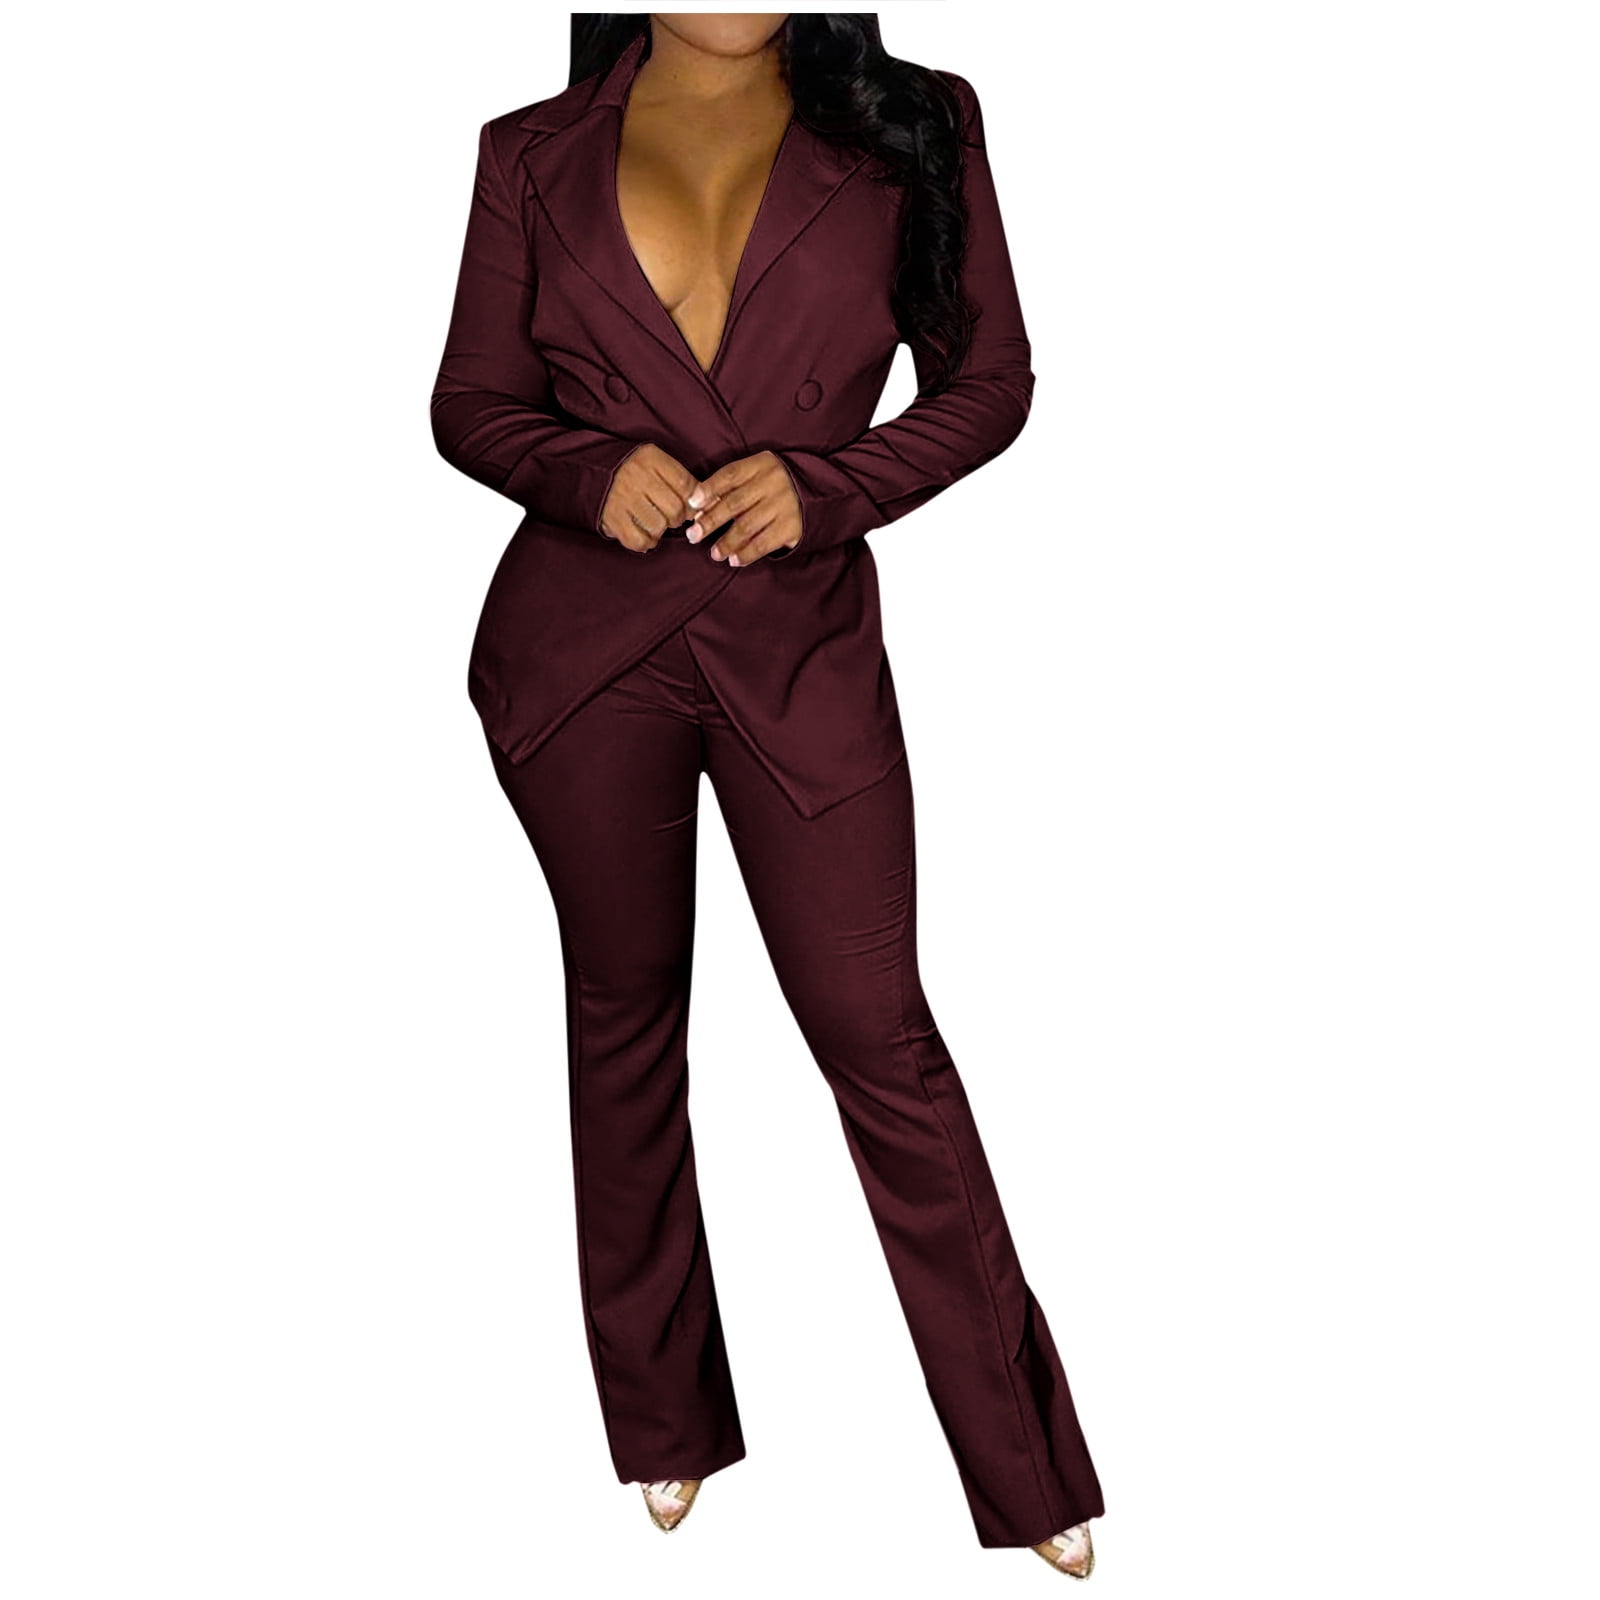 Work Outfits for Women | Blazer outfits for women, Business outfits women,  Suits for women